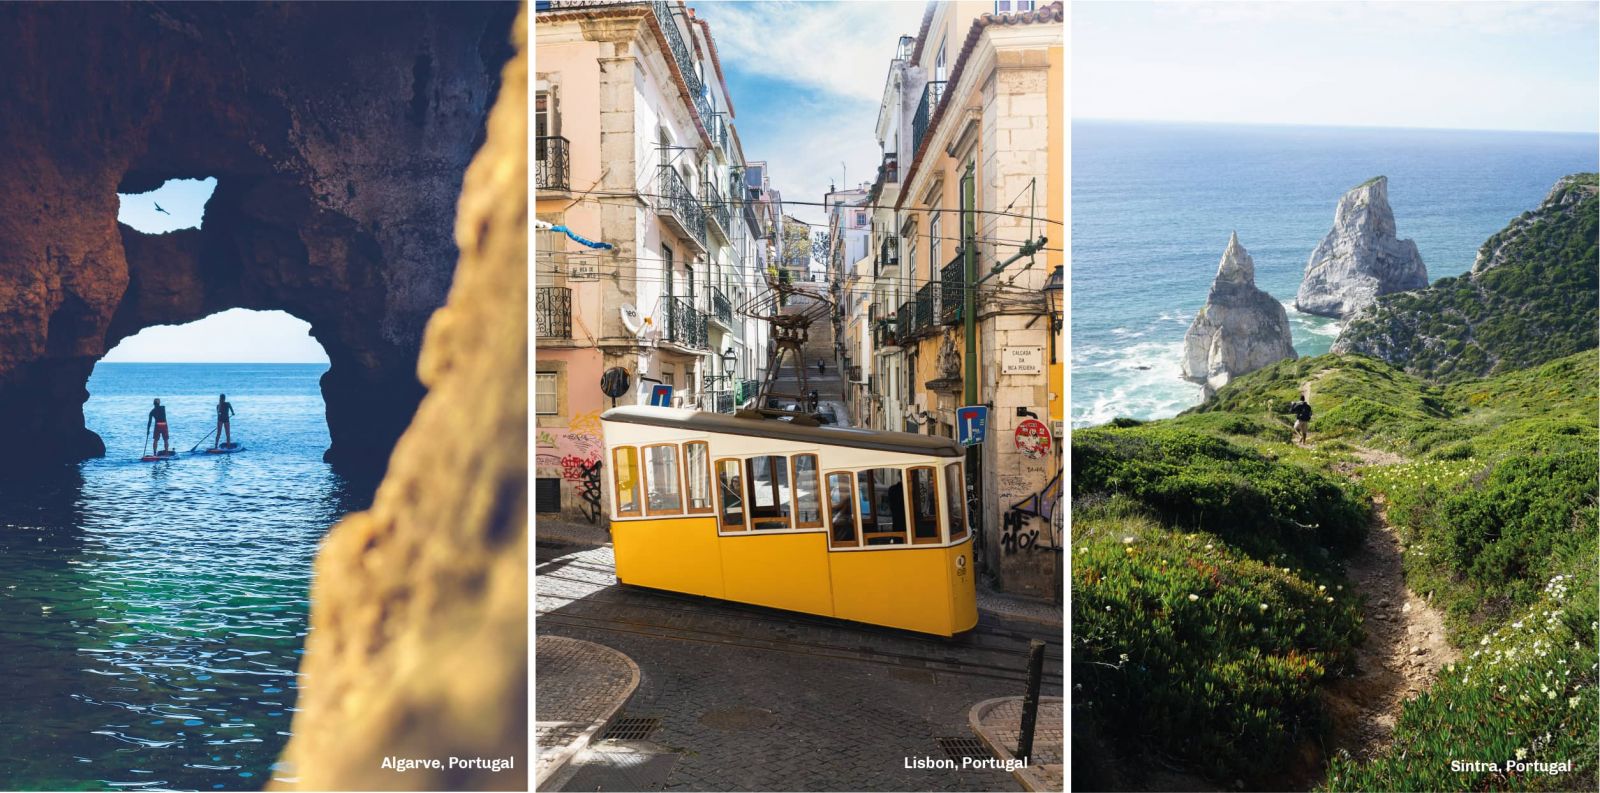 Portugal, Elected Best Country in World - Relocate to beautiful Portugal as a Digital Nomad, and for remote work! Image Credit: Rock Vincent, Max Zed, Iulia Topan